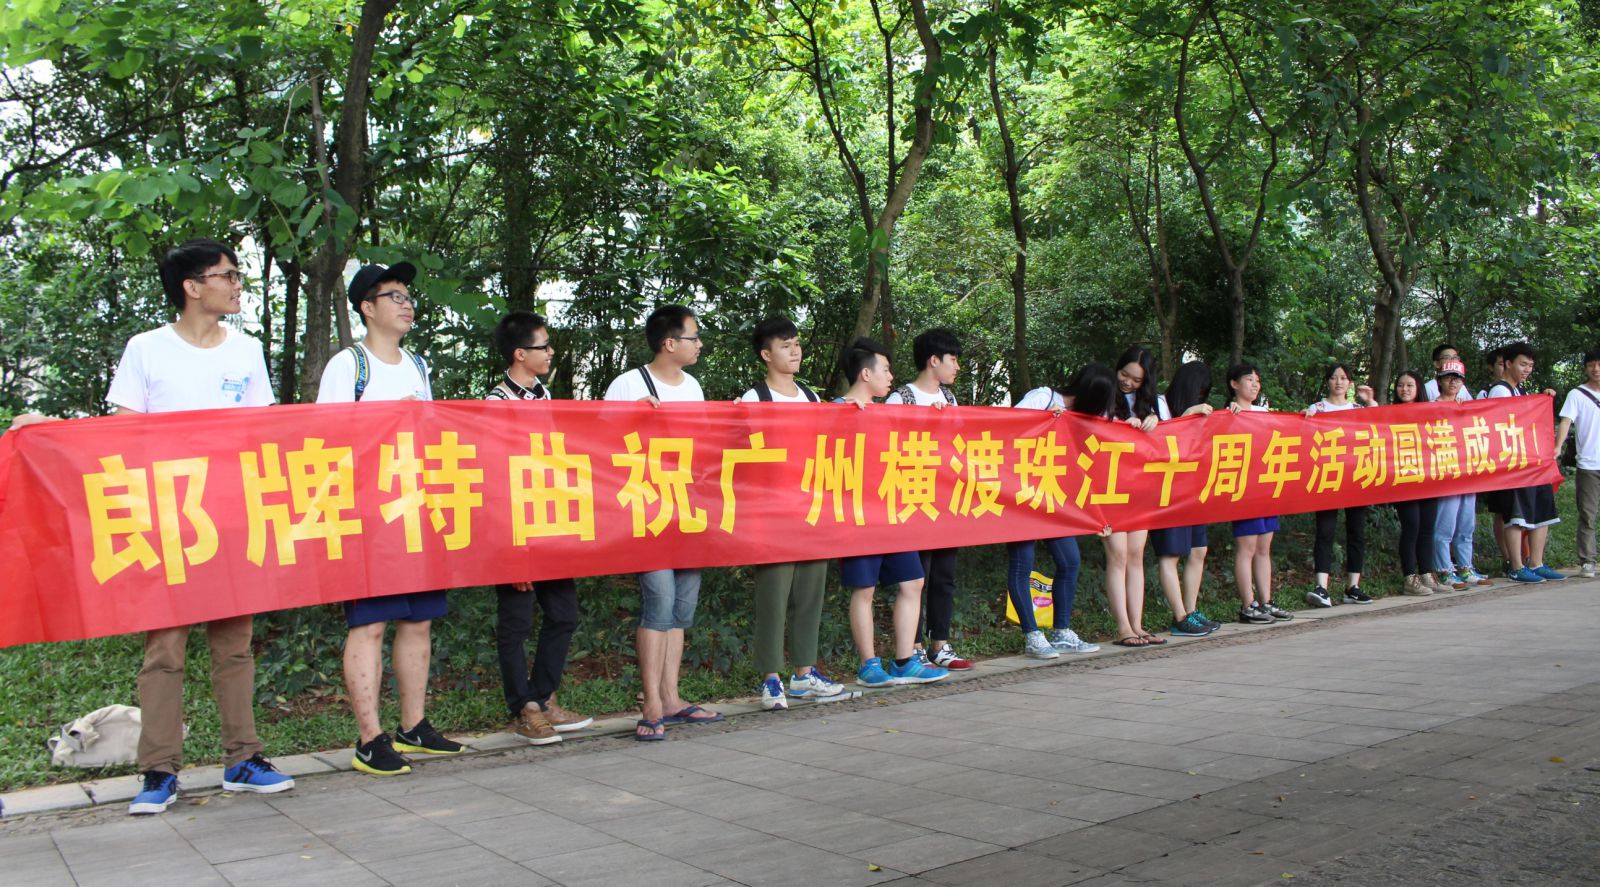 A banner at the Pearl River swim.